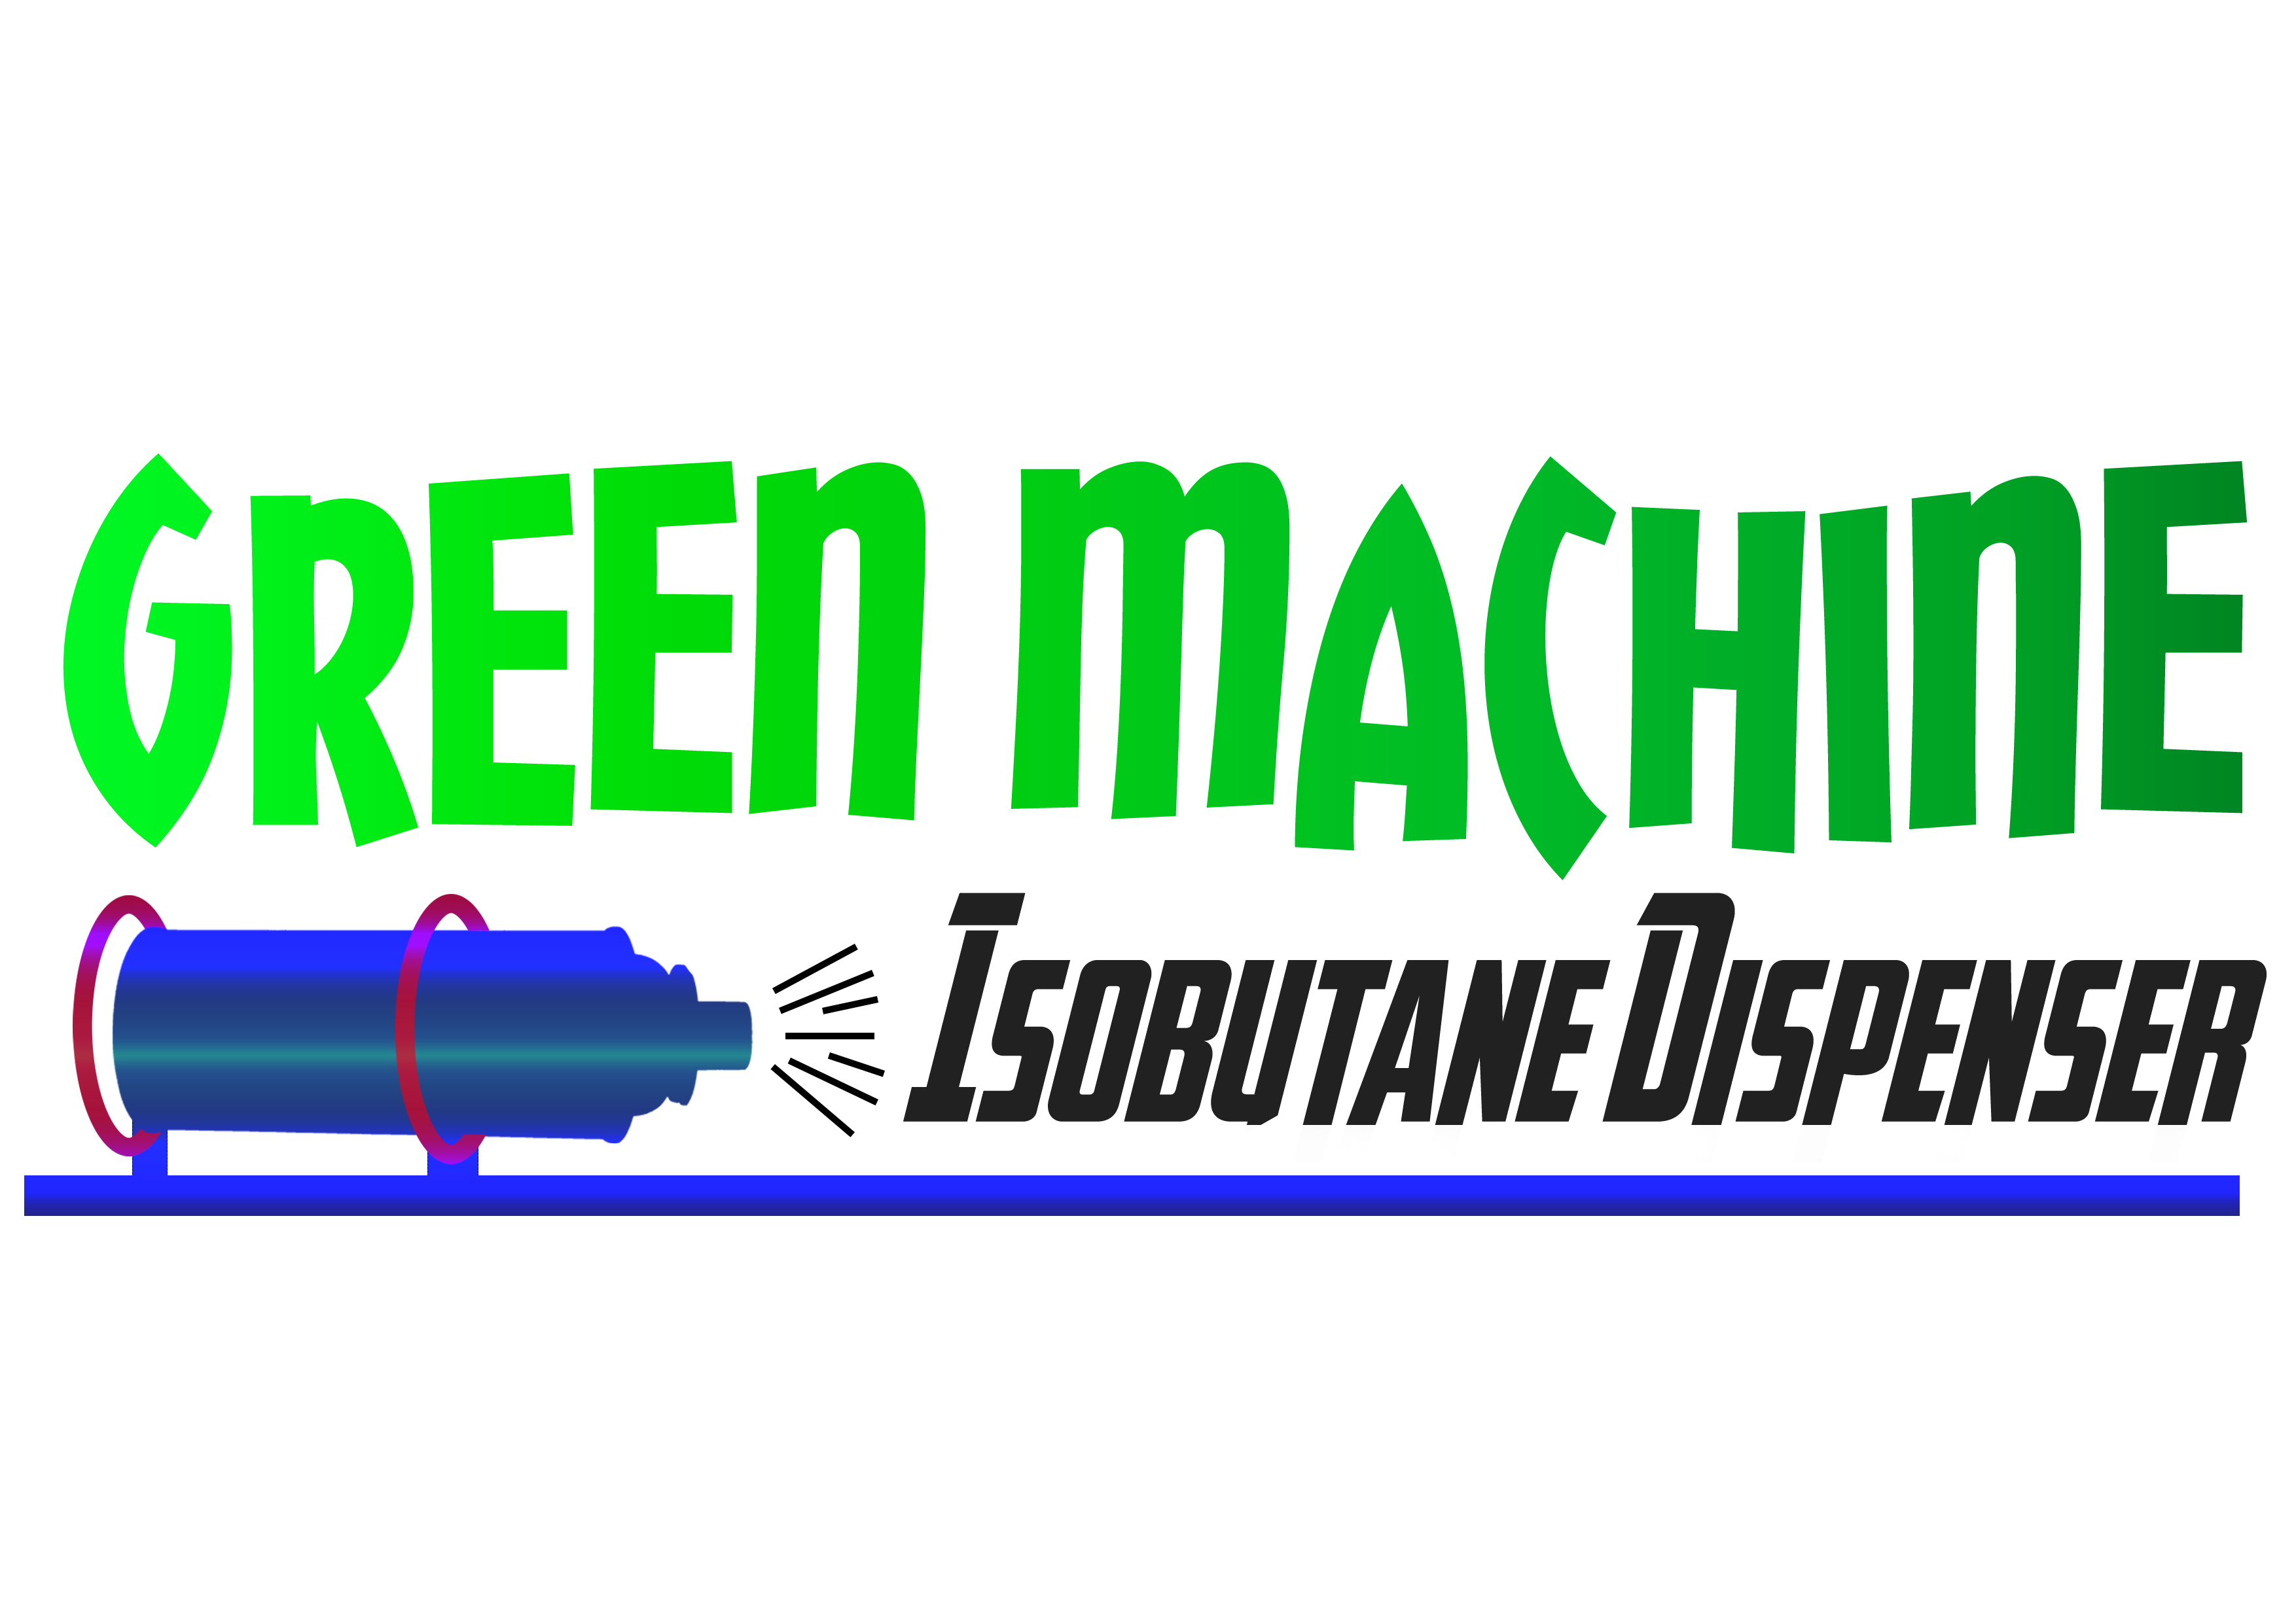 For safe and fast extractions: The Green Machine.